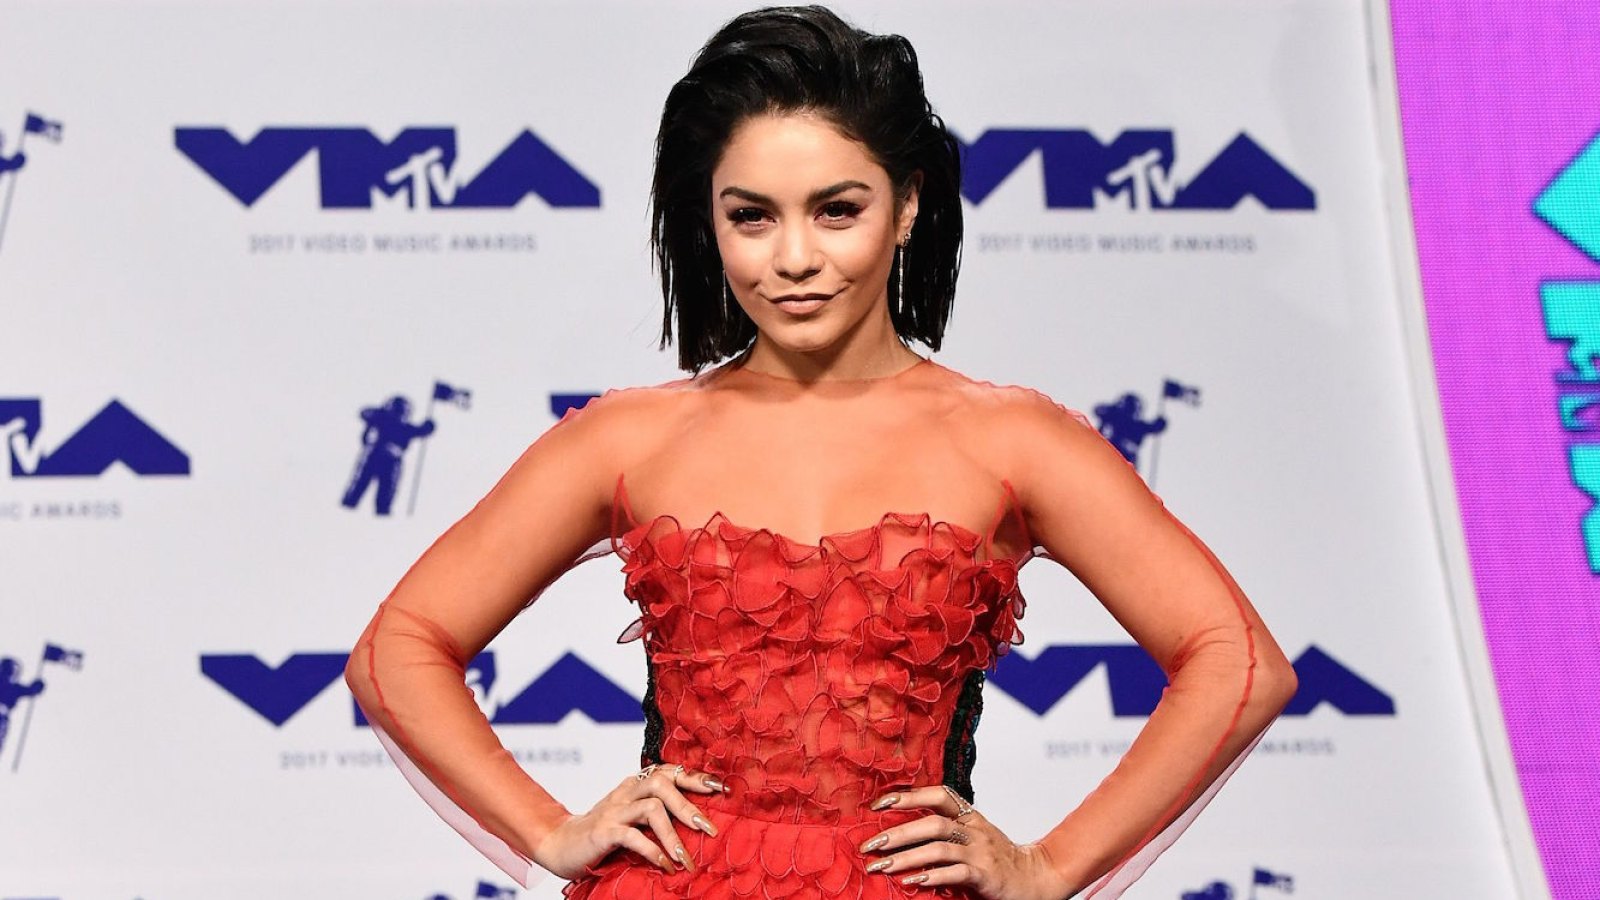 Vanessa Hudgens Set to Host MTV Movie and TV Awards Greatest of All Time Special